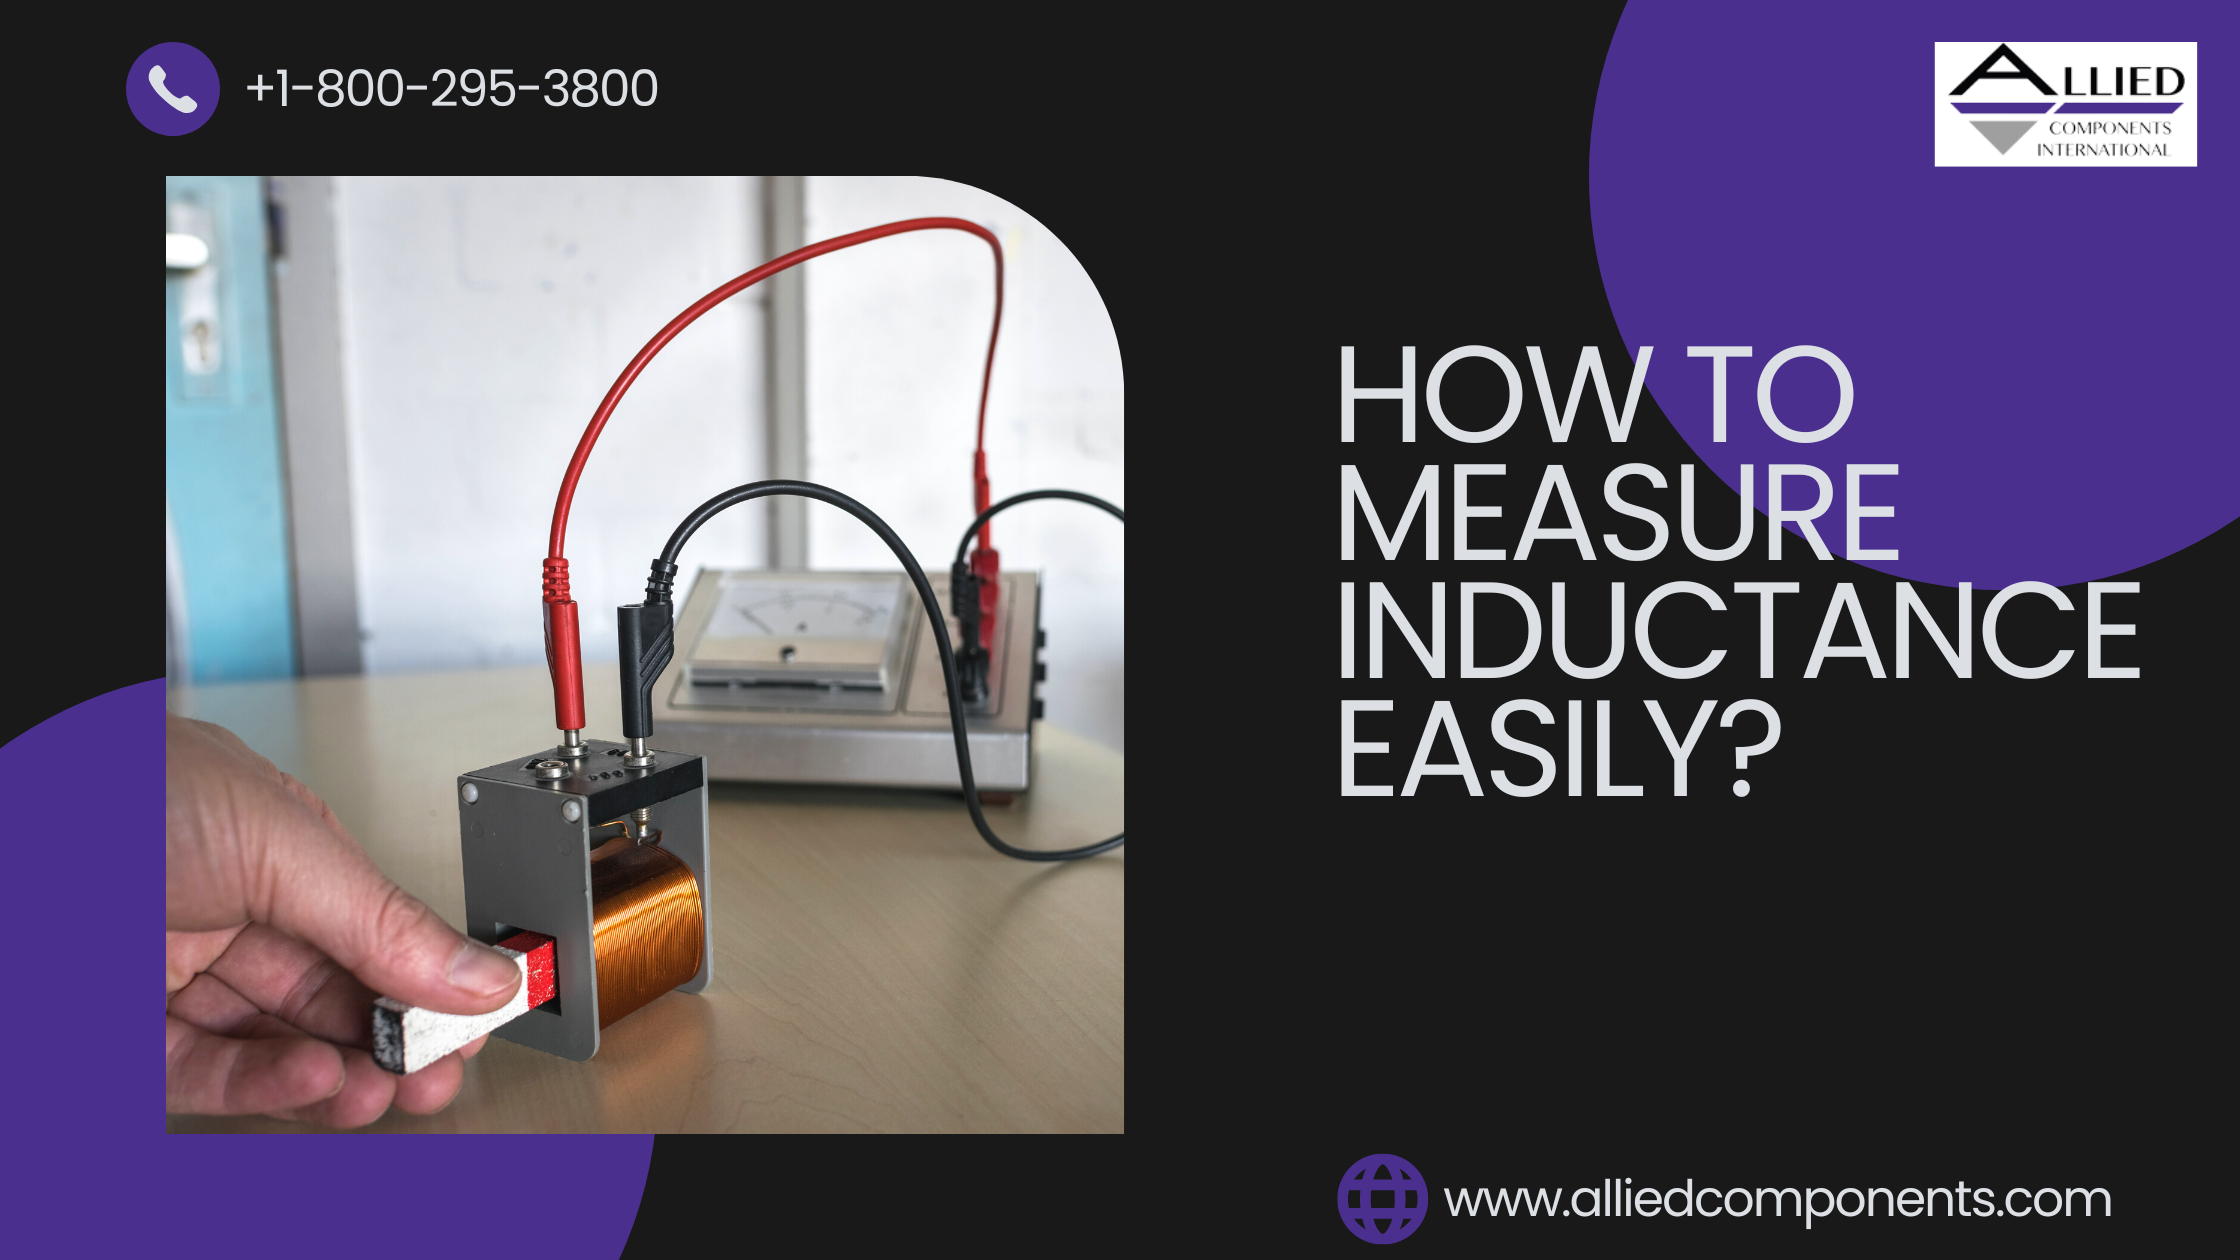 How to Measure Inductance Easily?